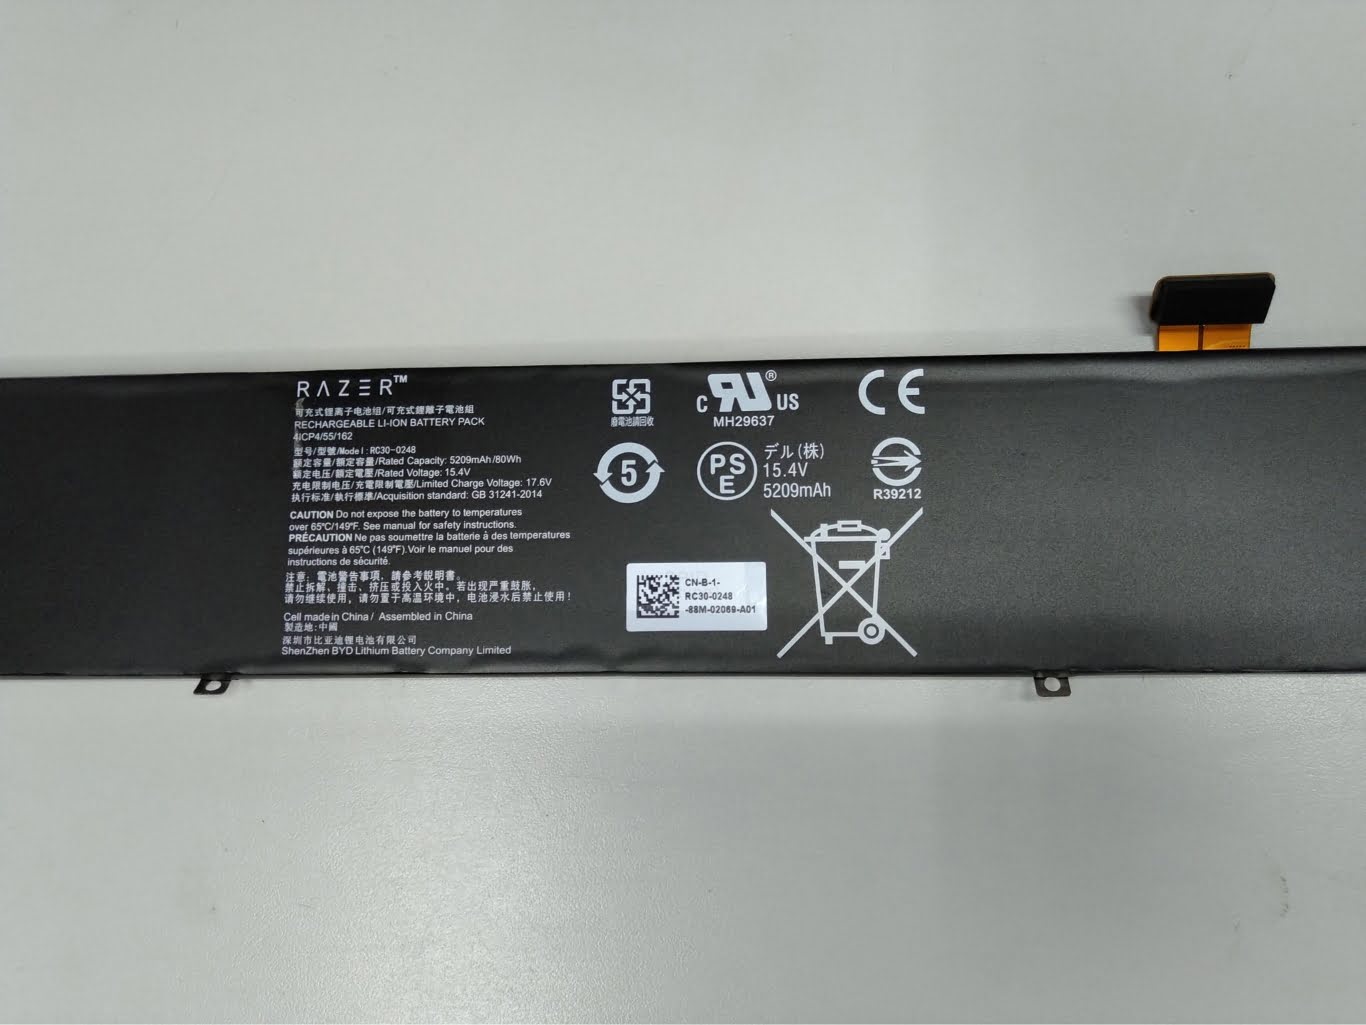 Blade Stealth 13 GTX Edition Laptop Batteries for Razer replacement